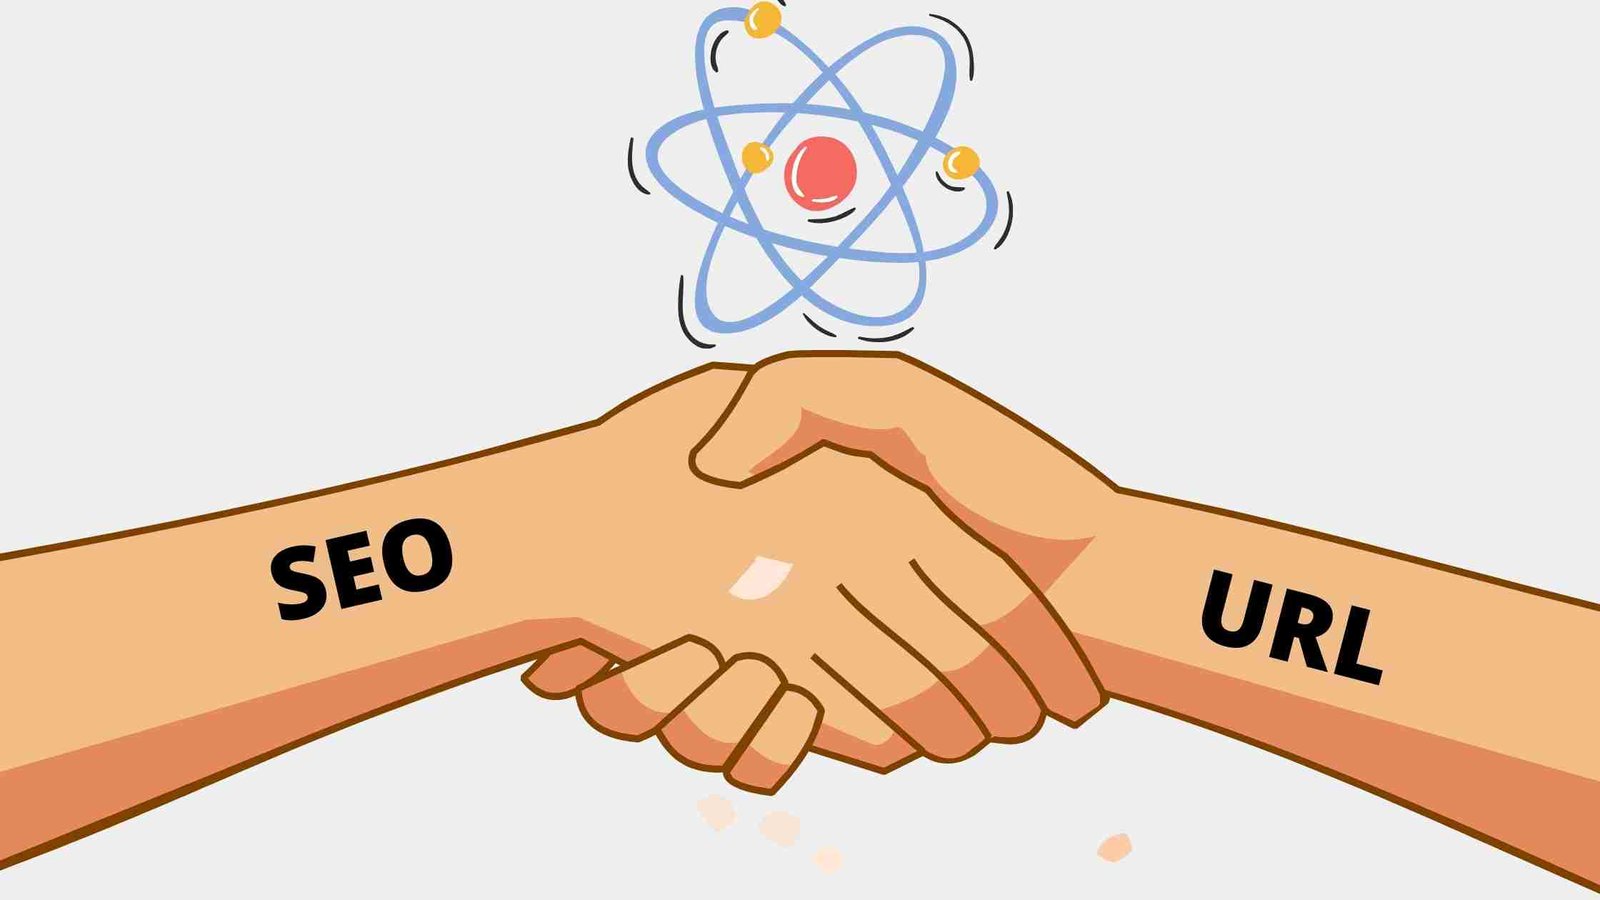 seo and url shaking hands